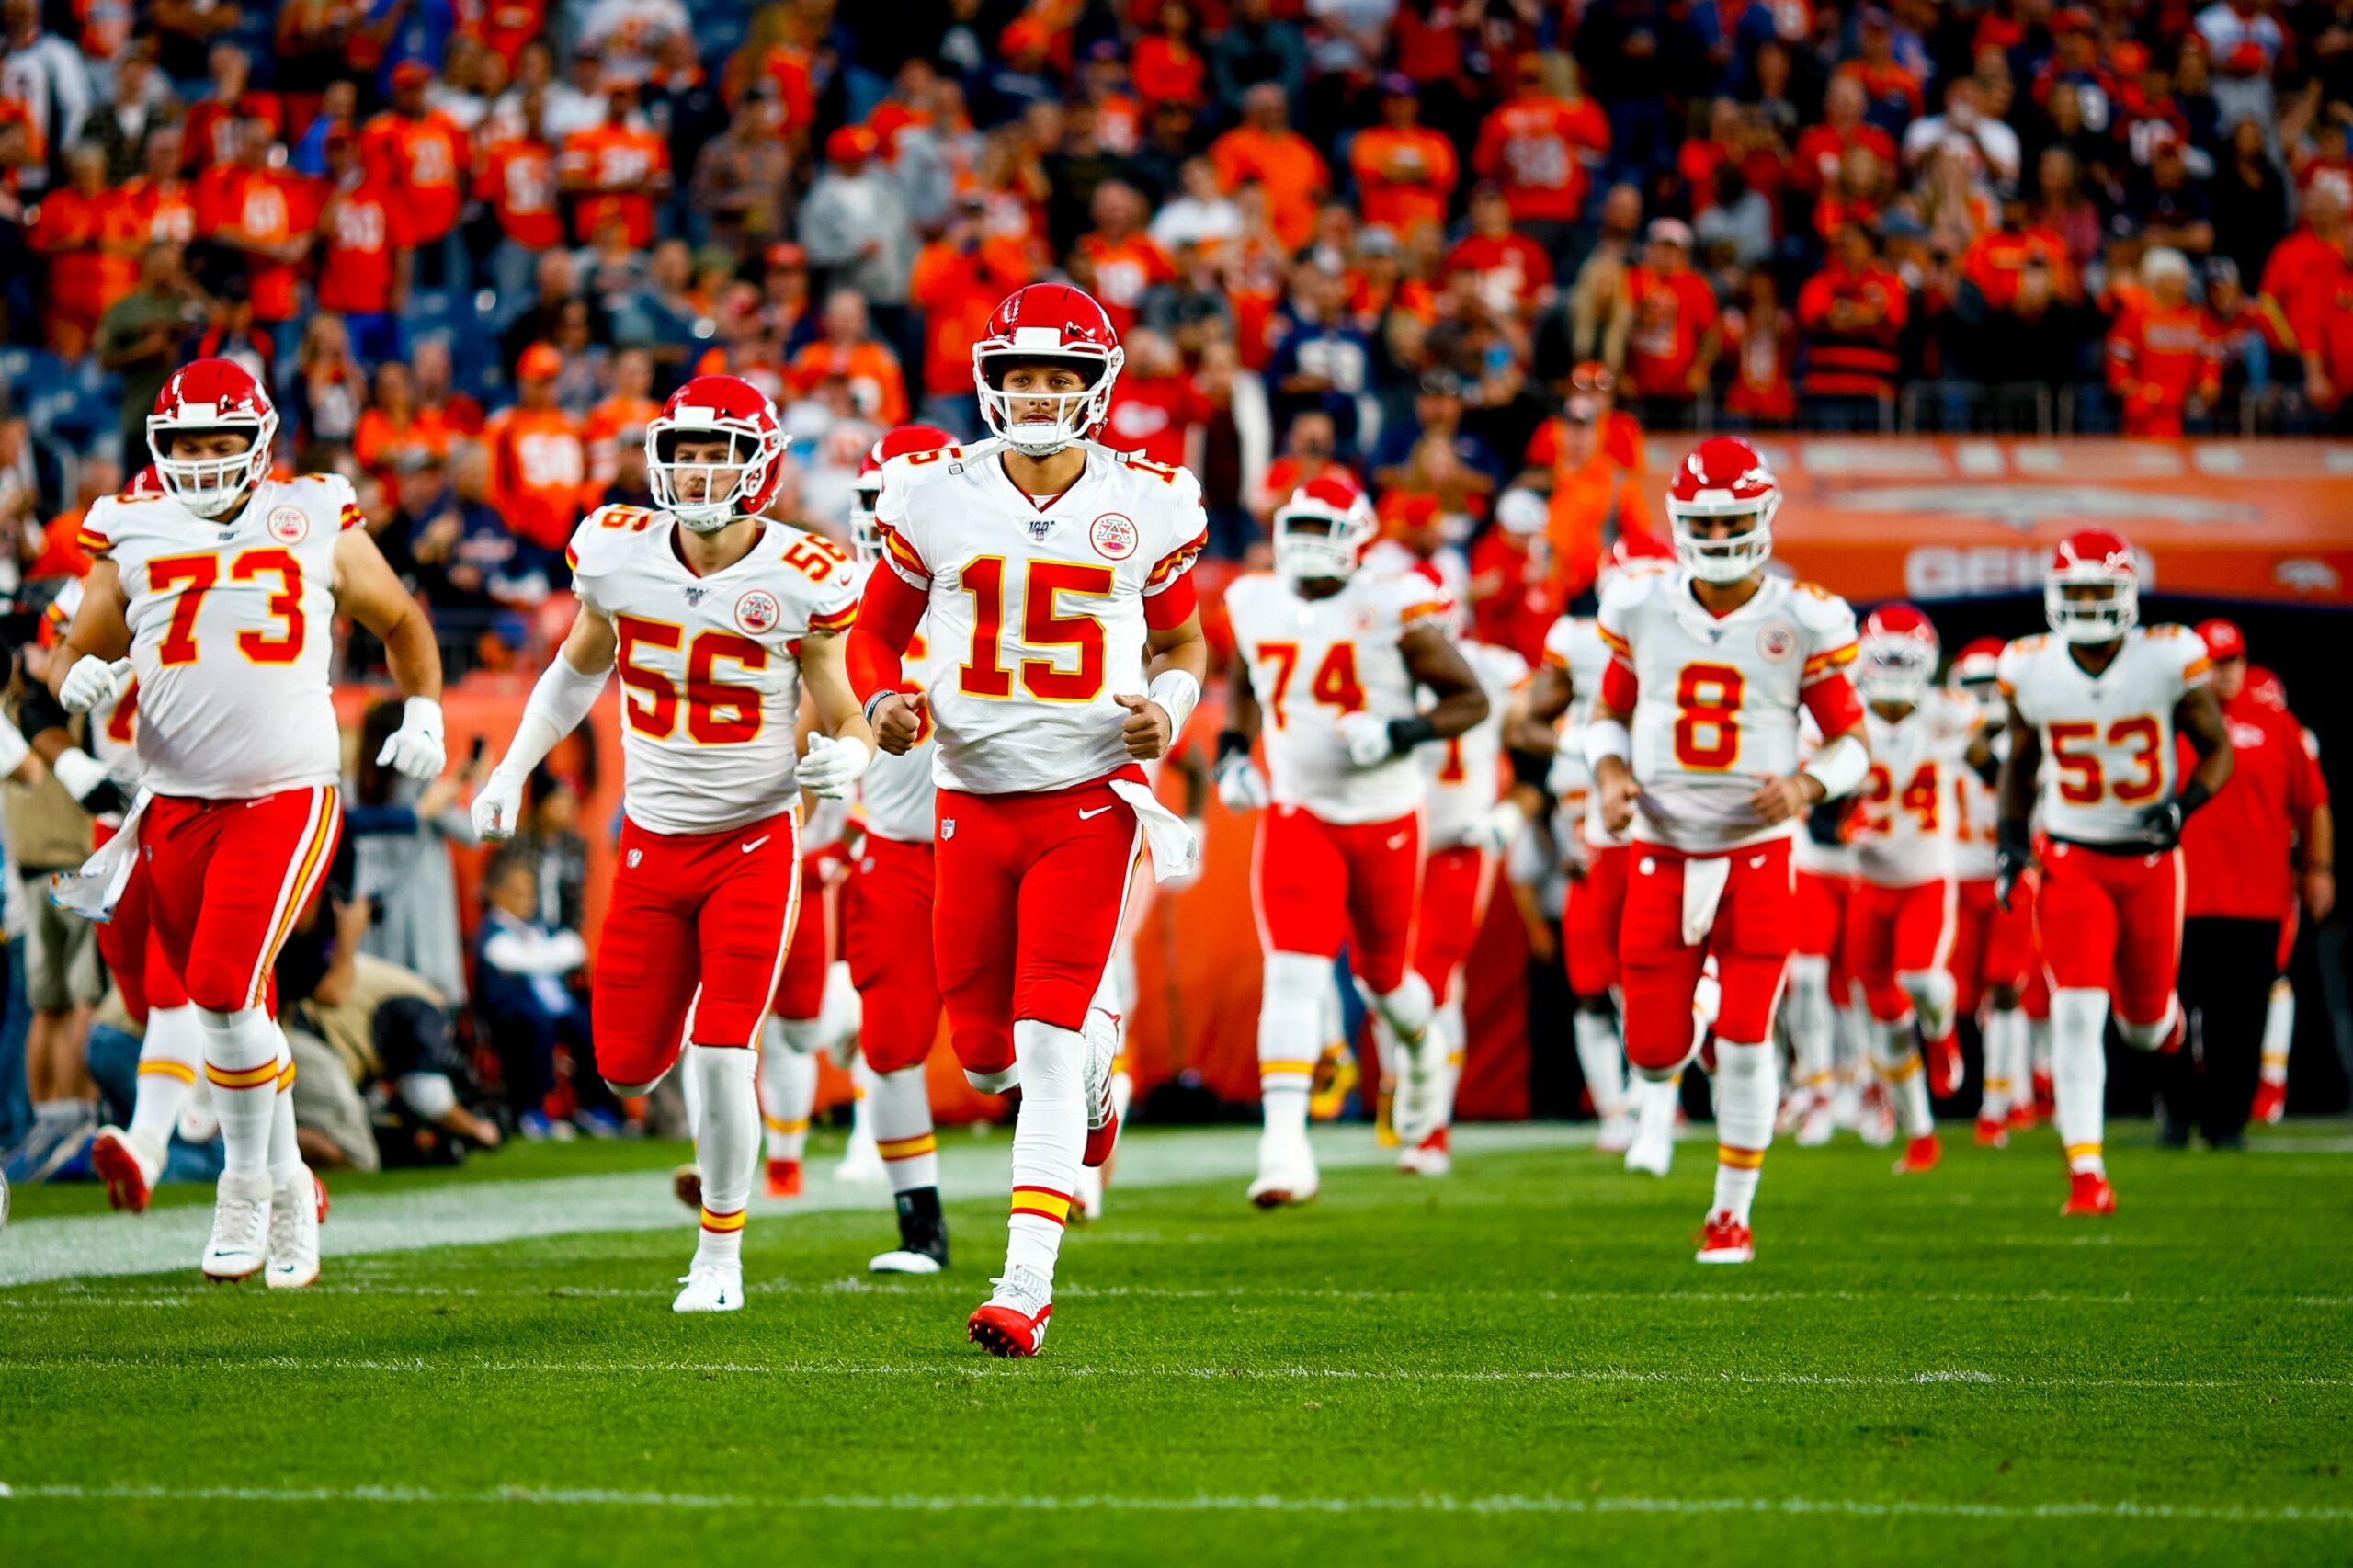 Patrick Mahomes and the Kansas City Chiefs have some famous fans